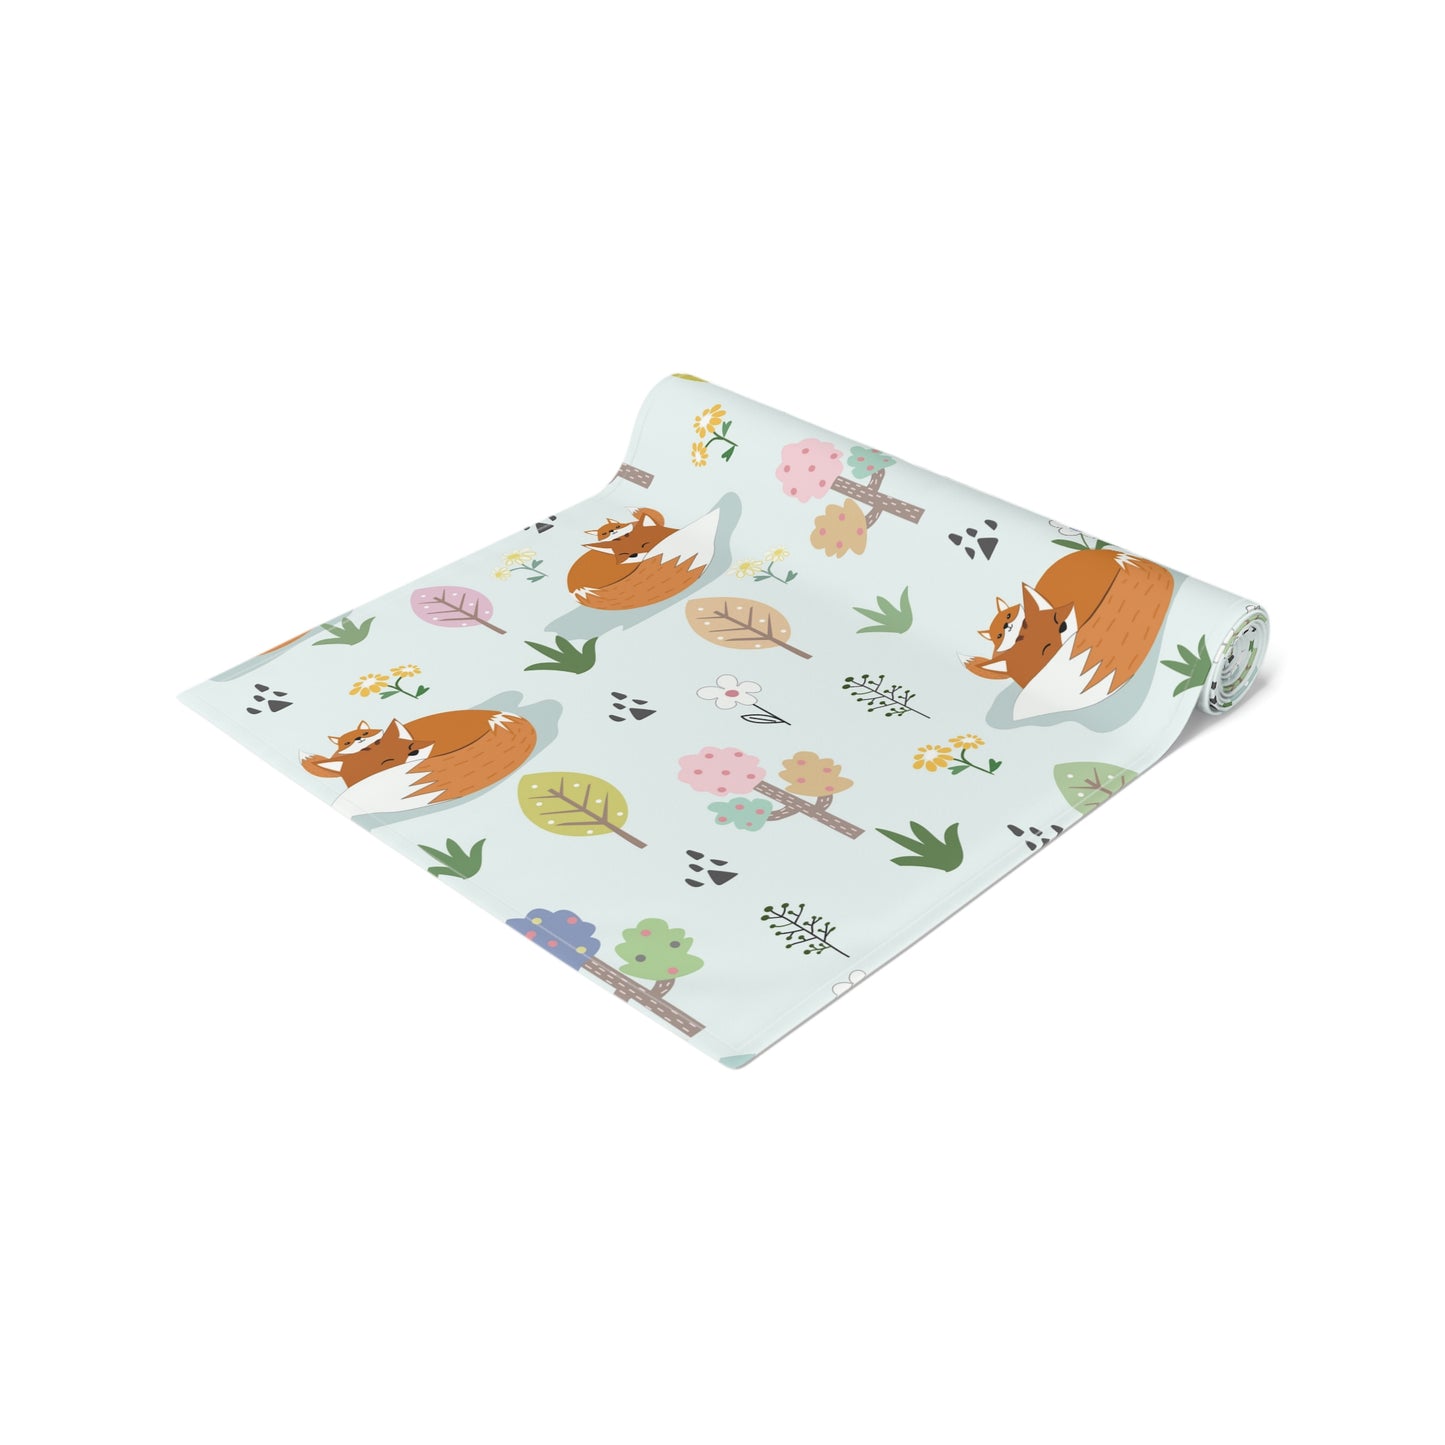 Mom and Baby Fox Table Runner (Cotton, Poly)